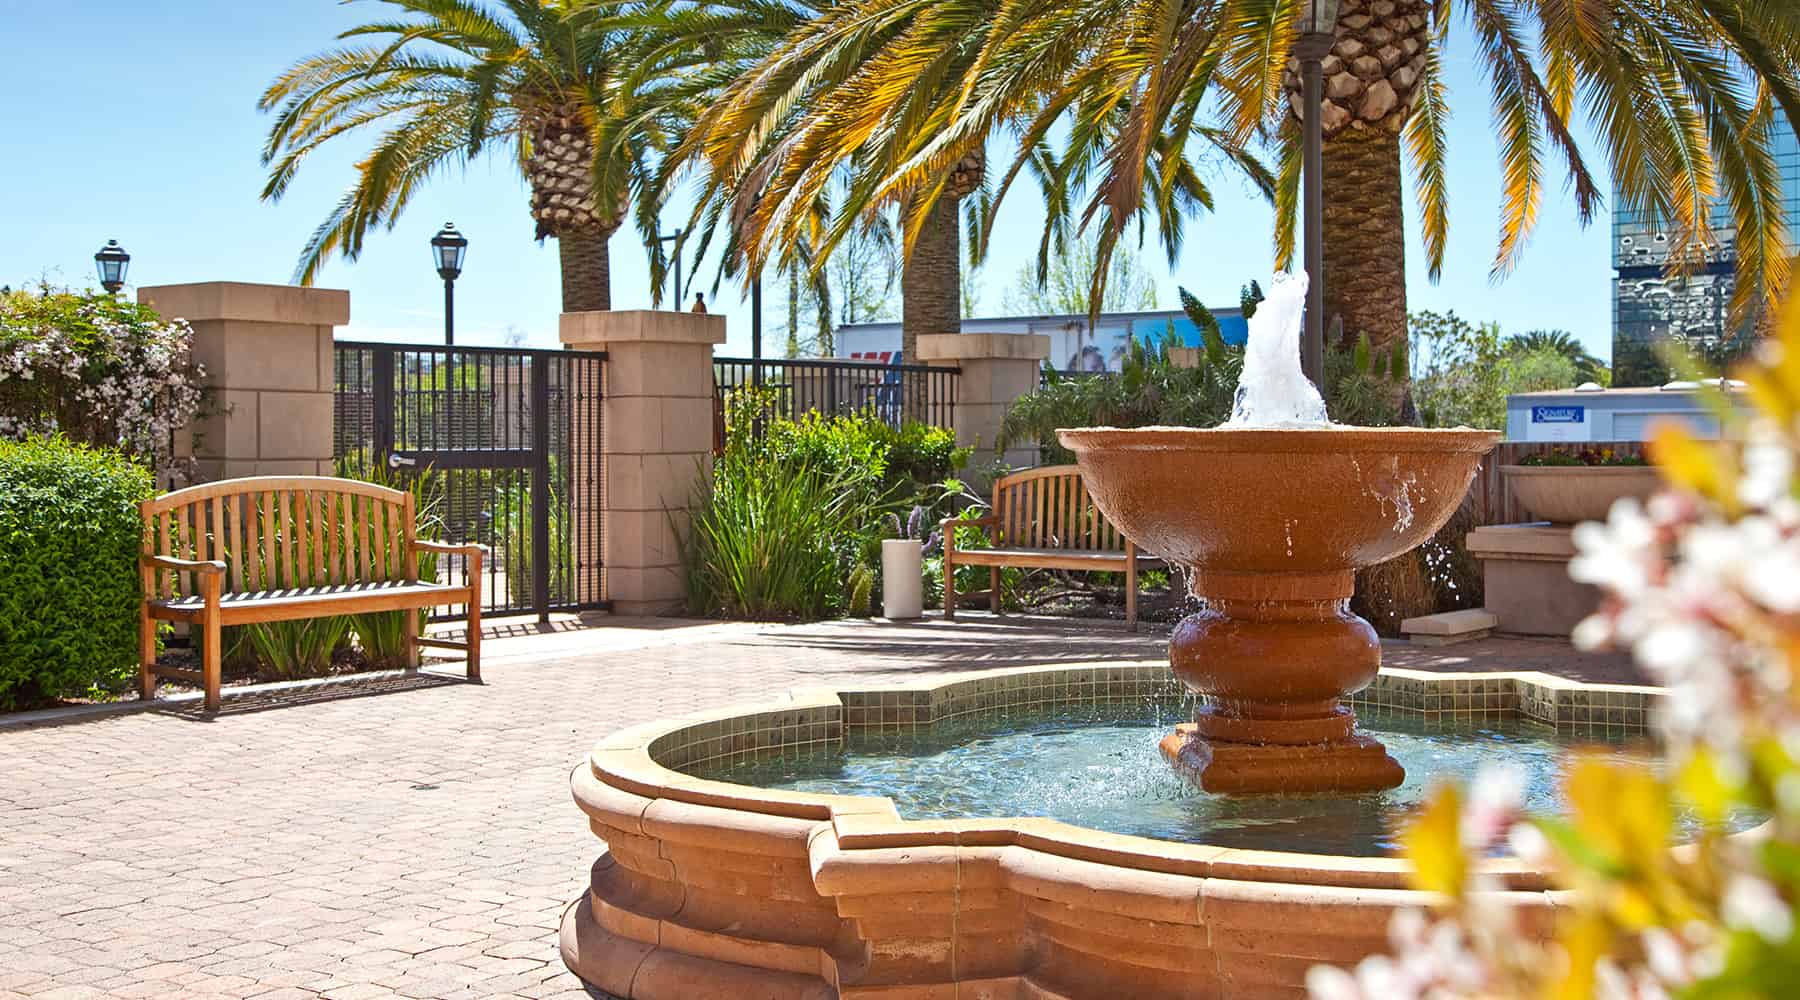 Renaissance Square courtyard with central water fountain, bench seating under palm trees